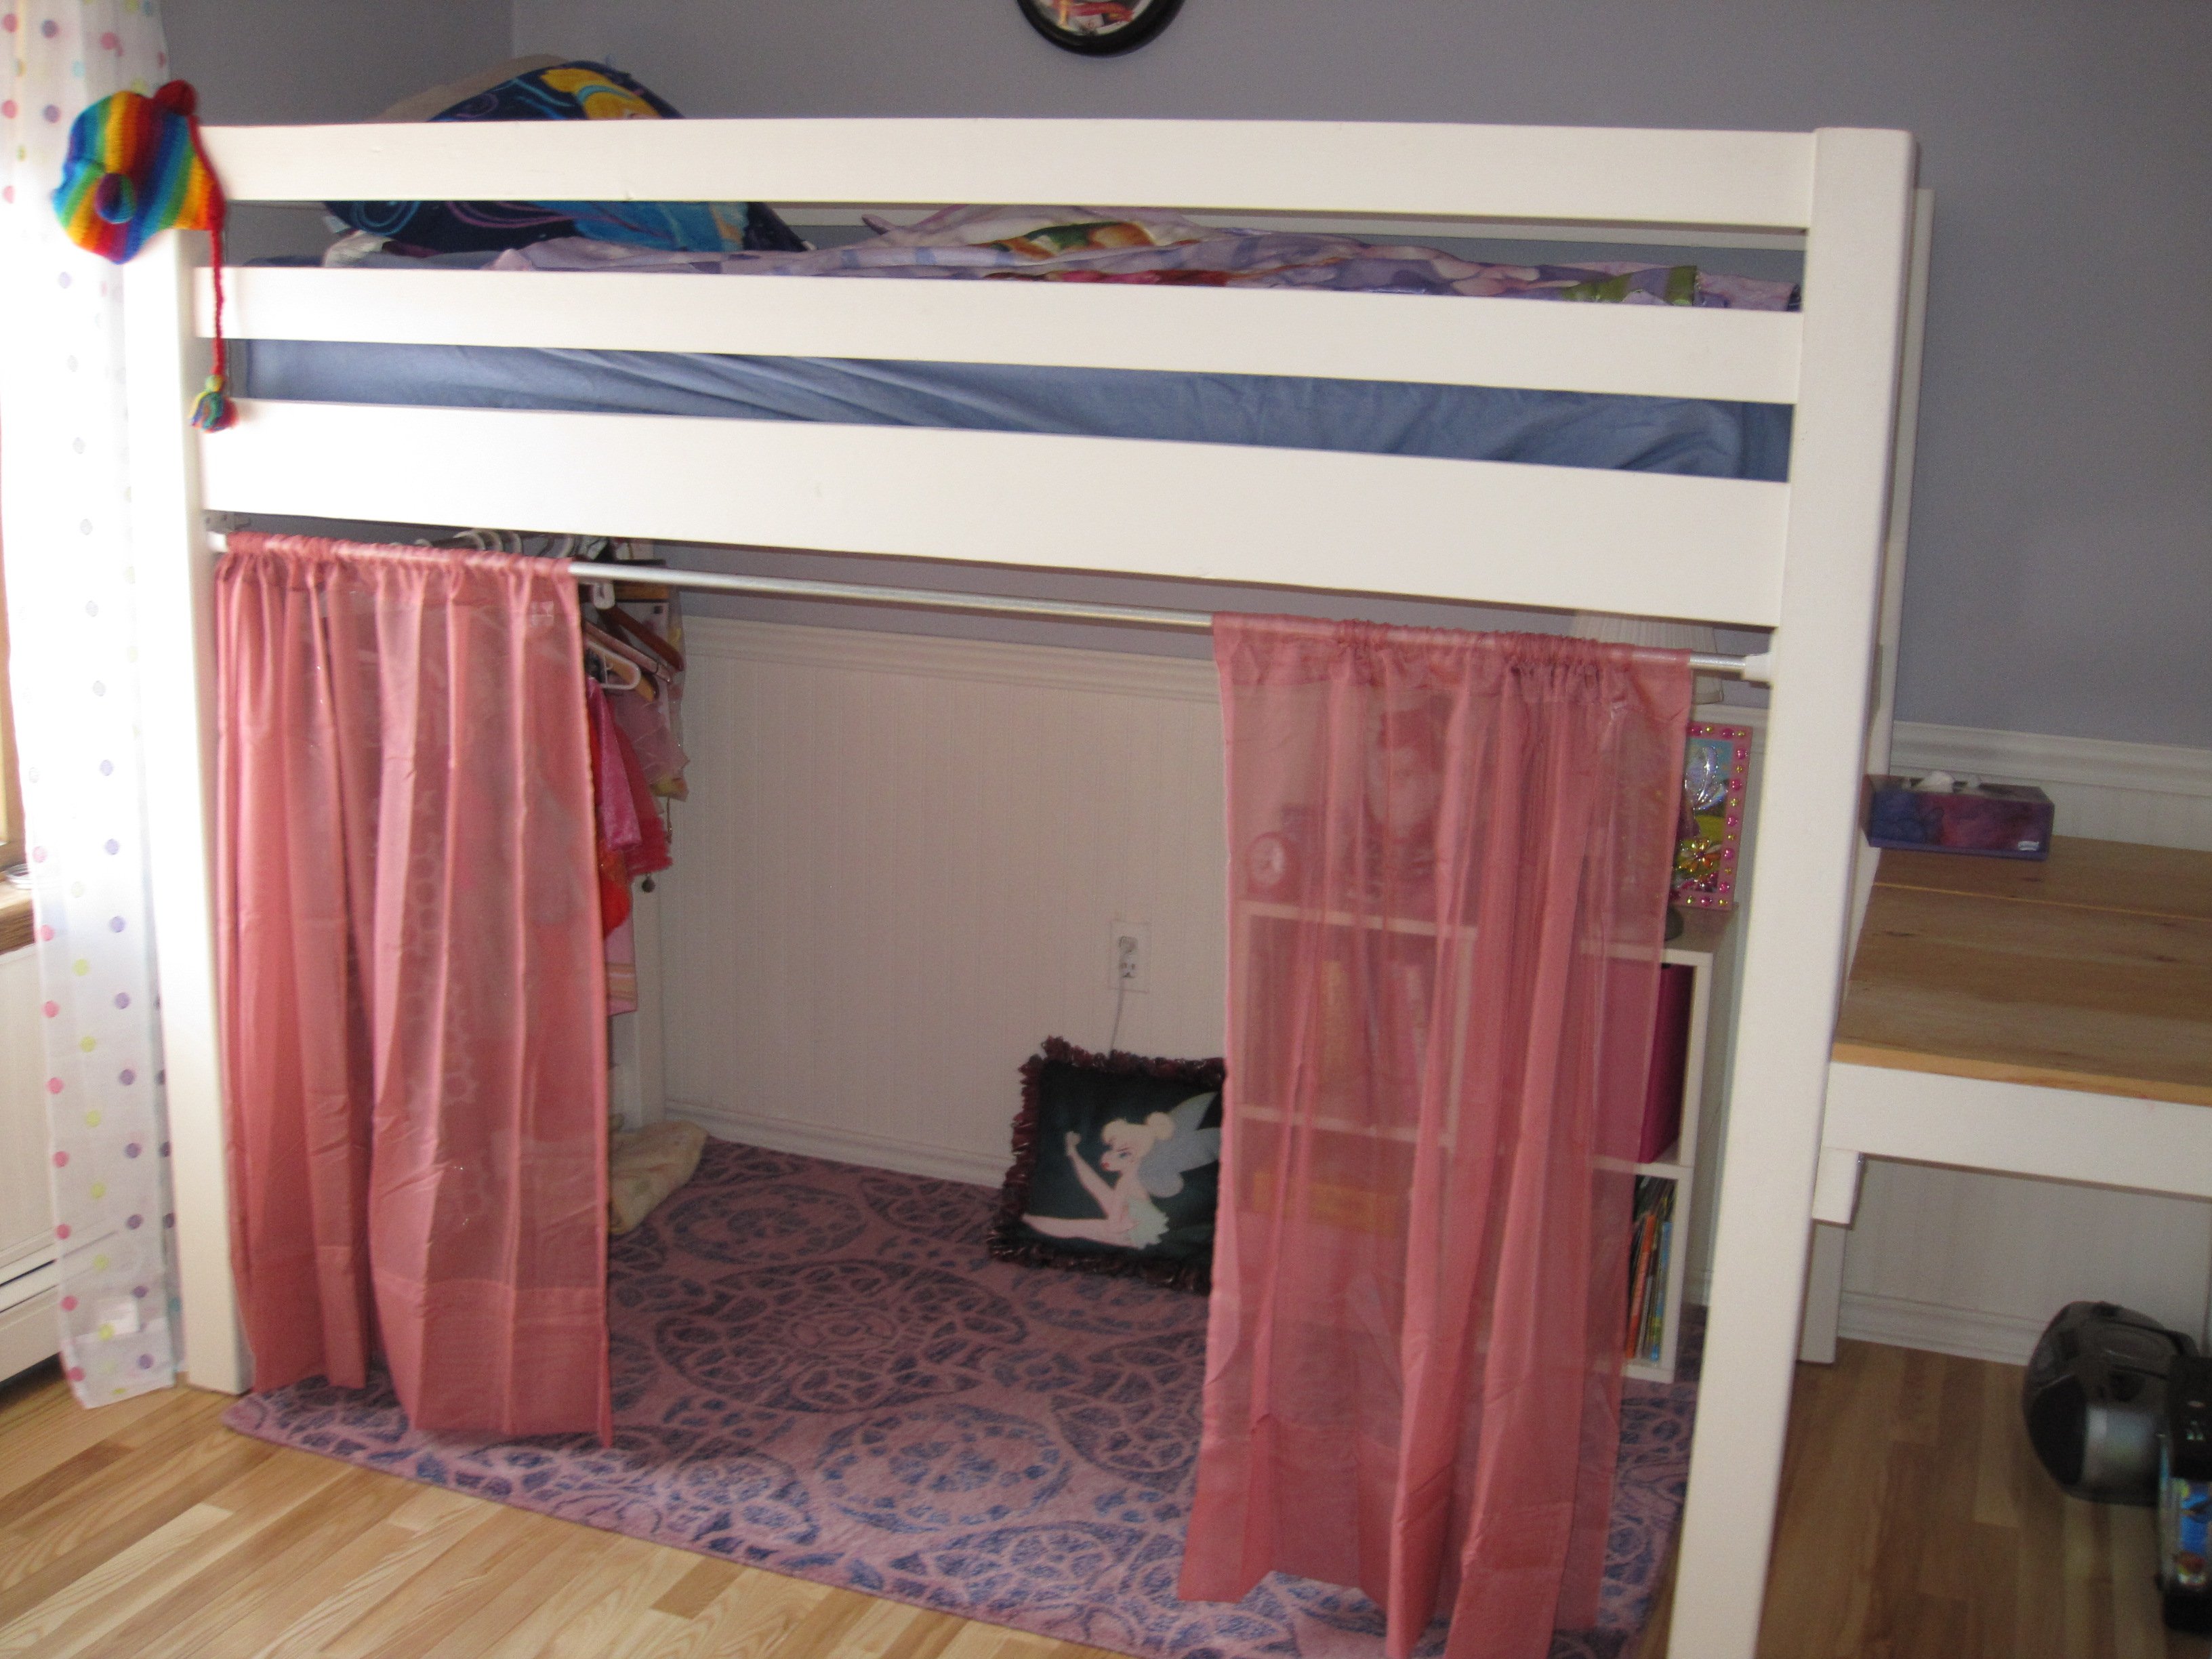 Pin 2x4 Bunk Beds Plans Image Search Results on Pinterest